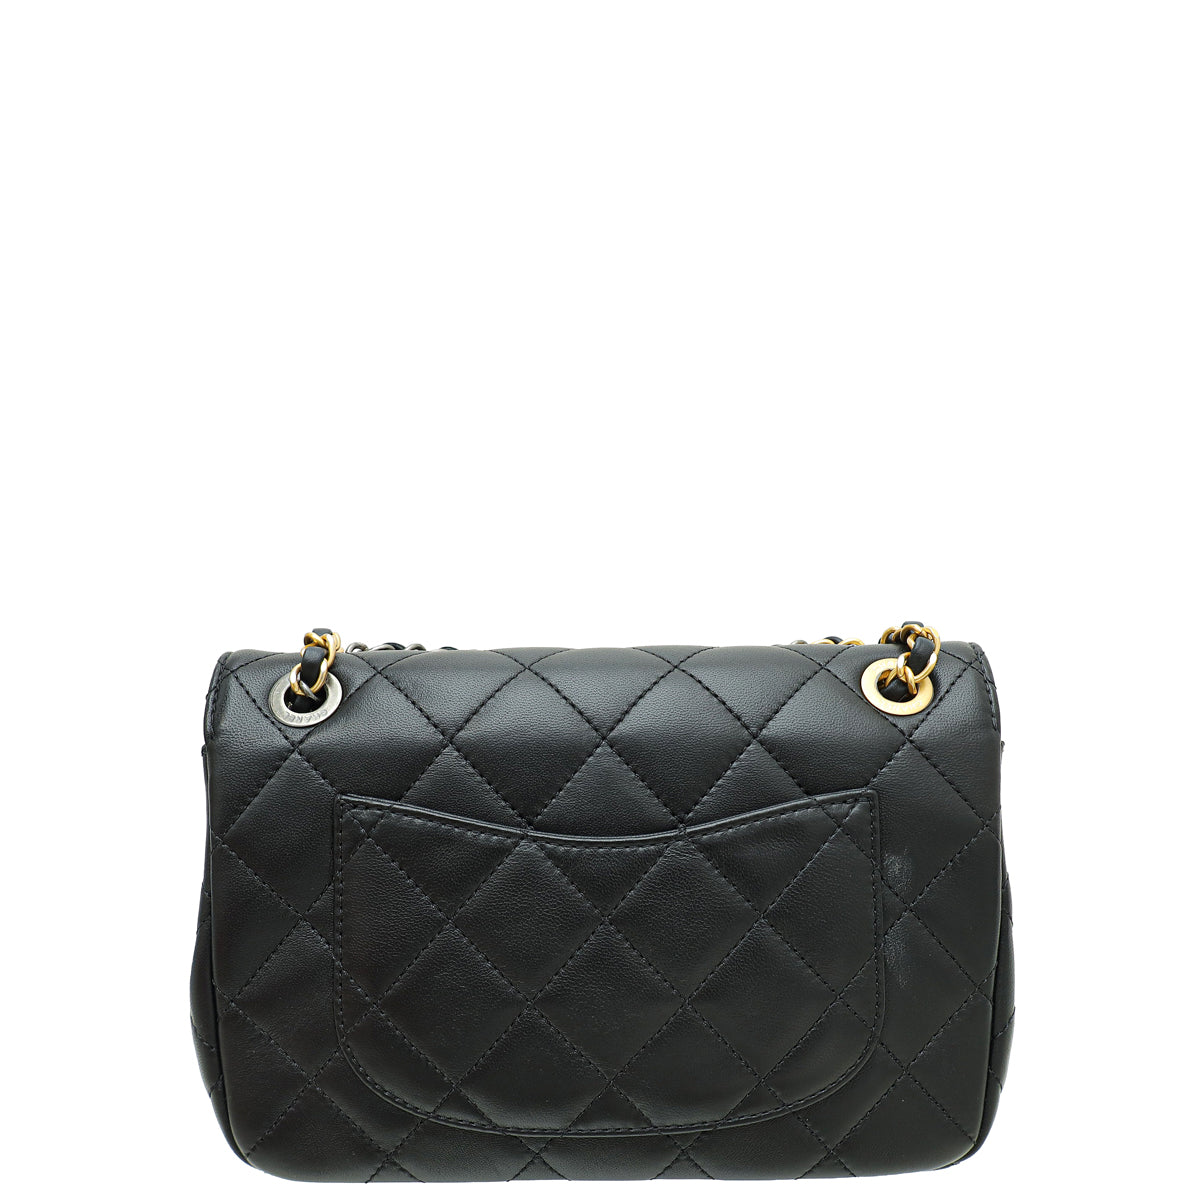 Chanel Black Coco Clips Flap Small Bag